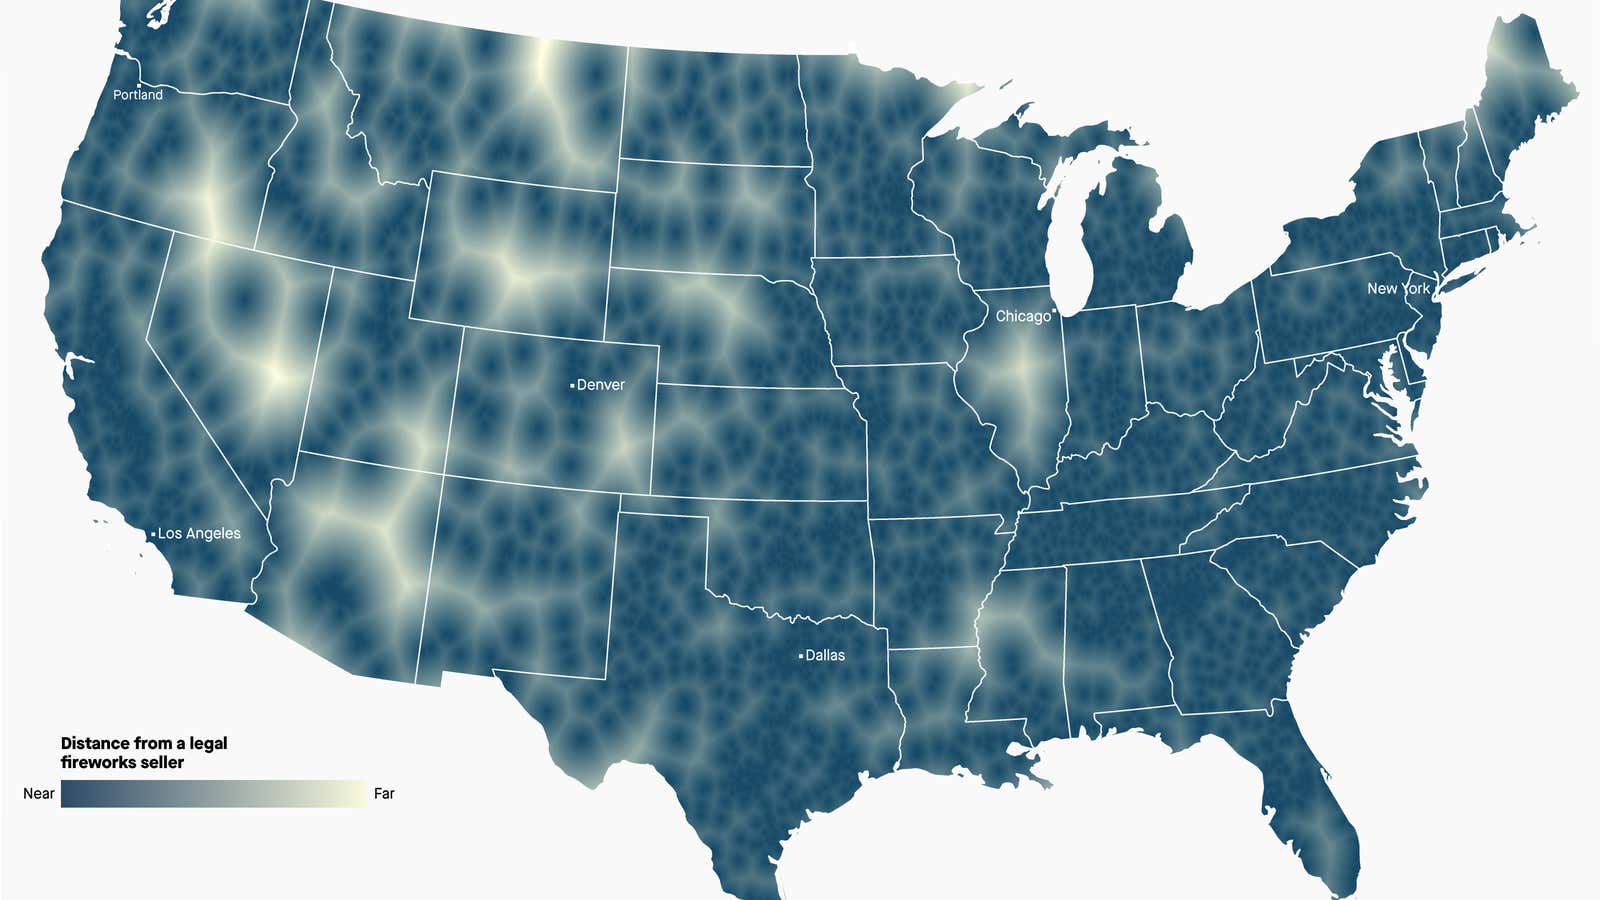 The places in the US that are the farthest from fireworks